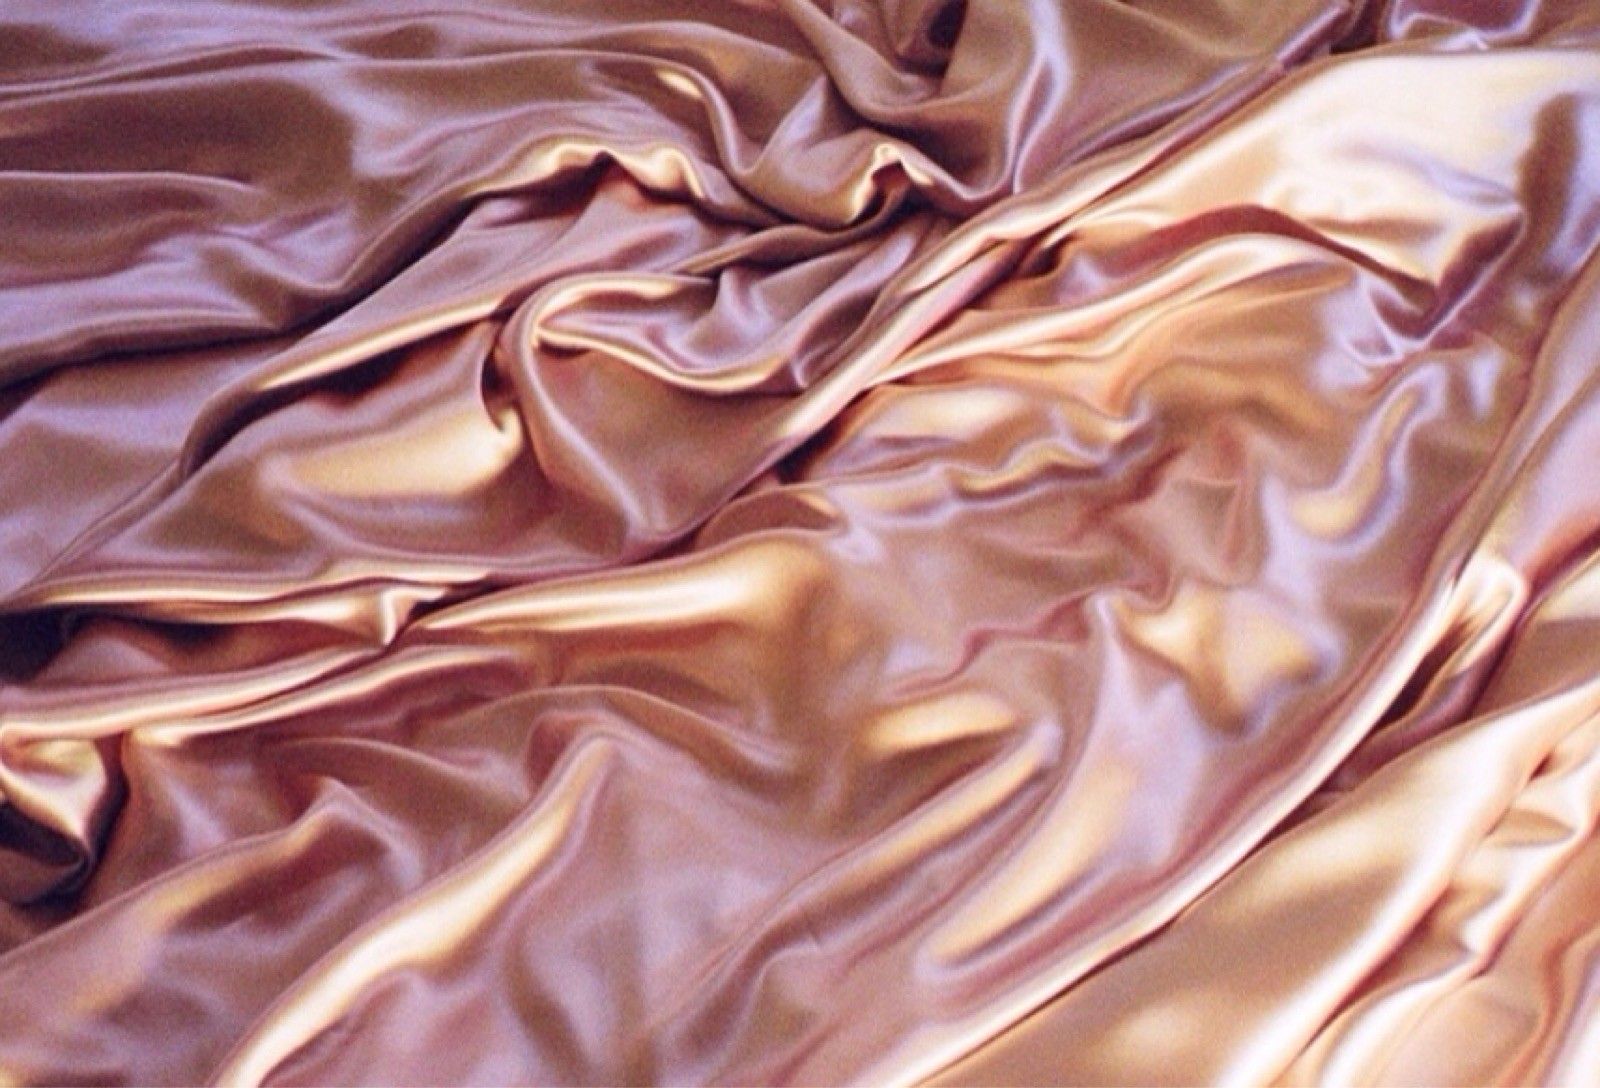 A bed with a pink silk sheet on it - Rose gold, silk